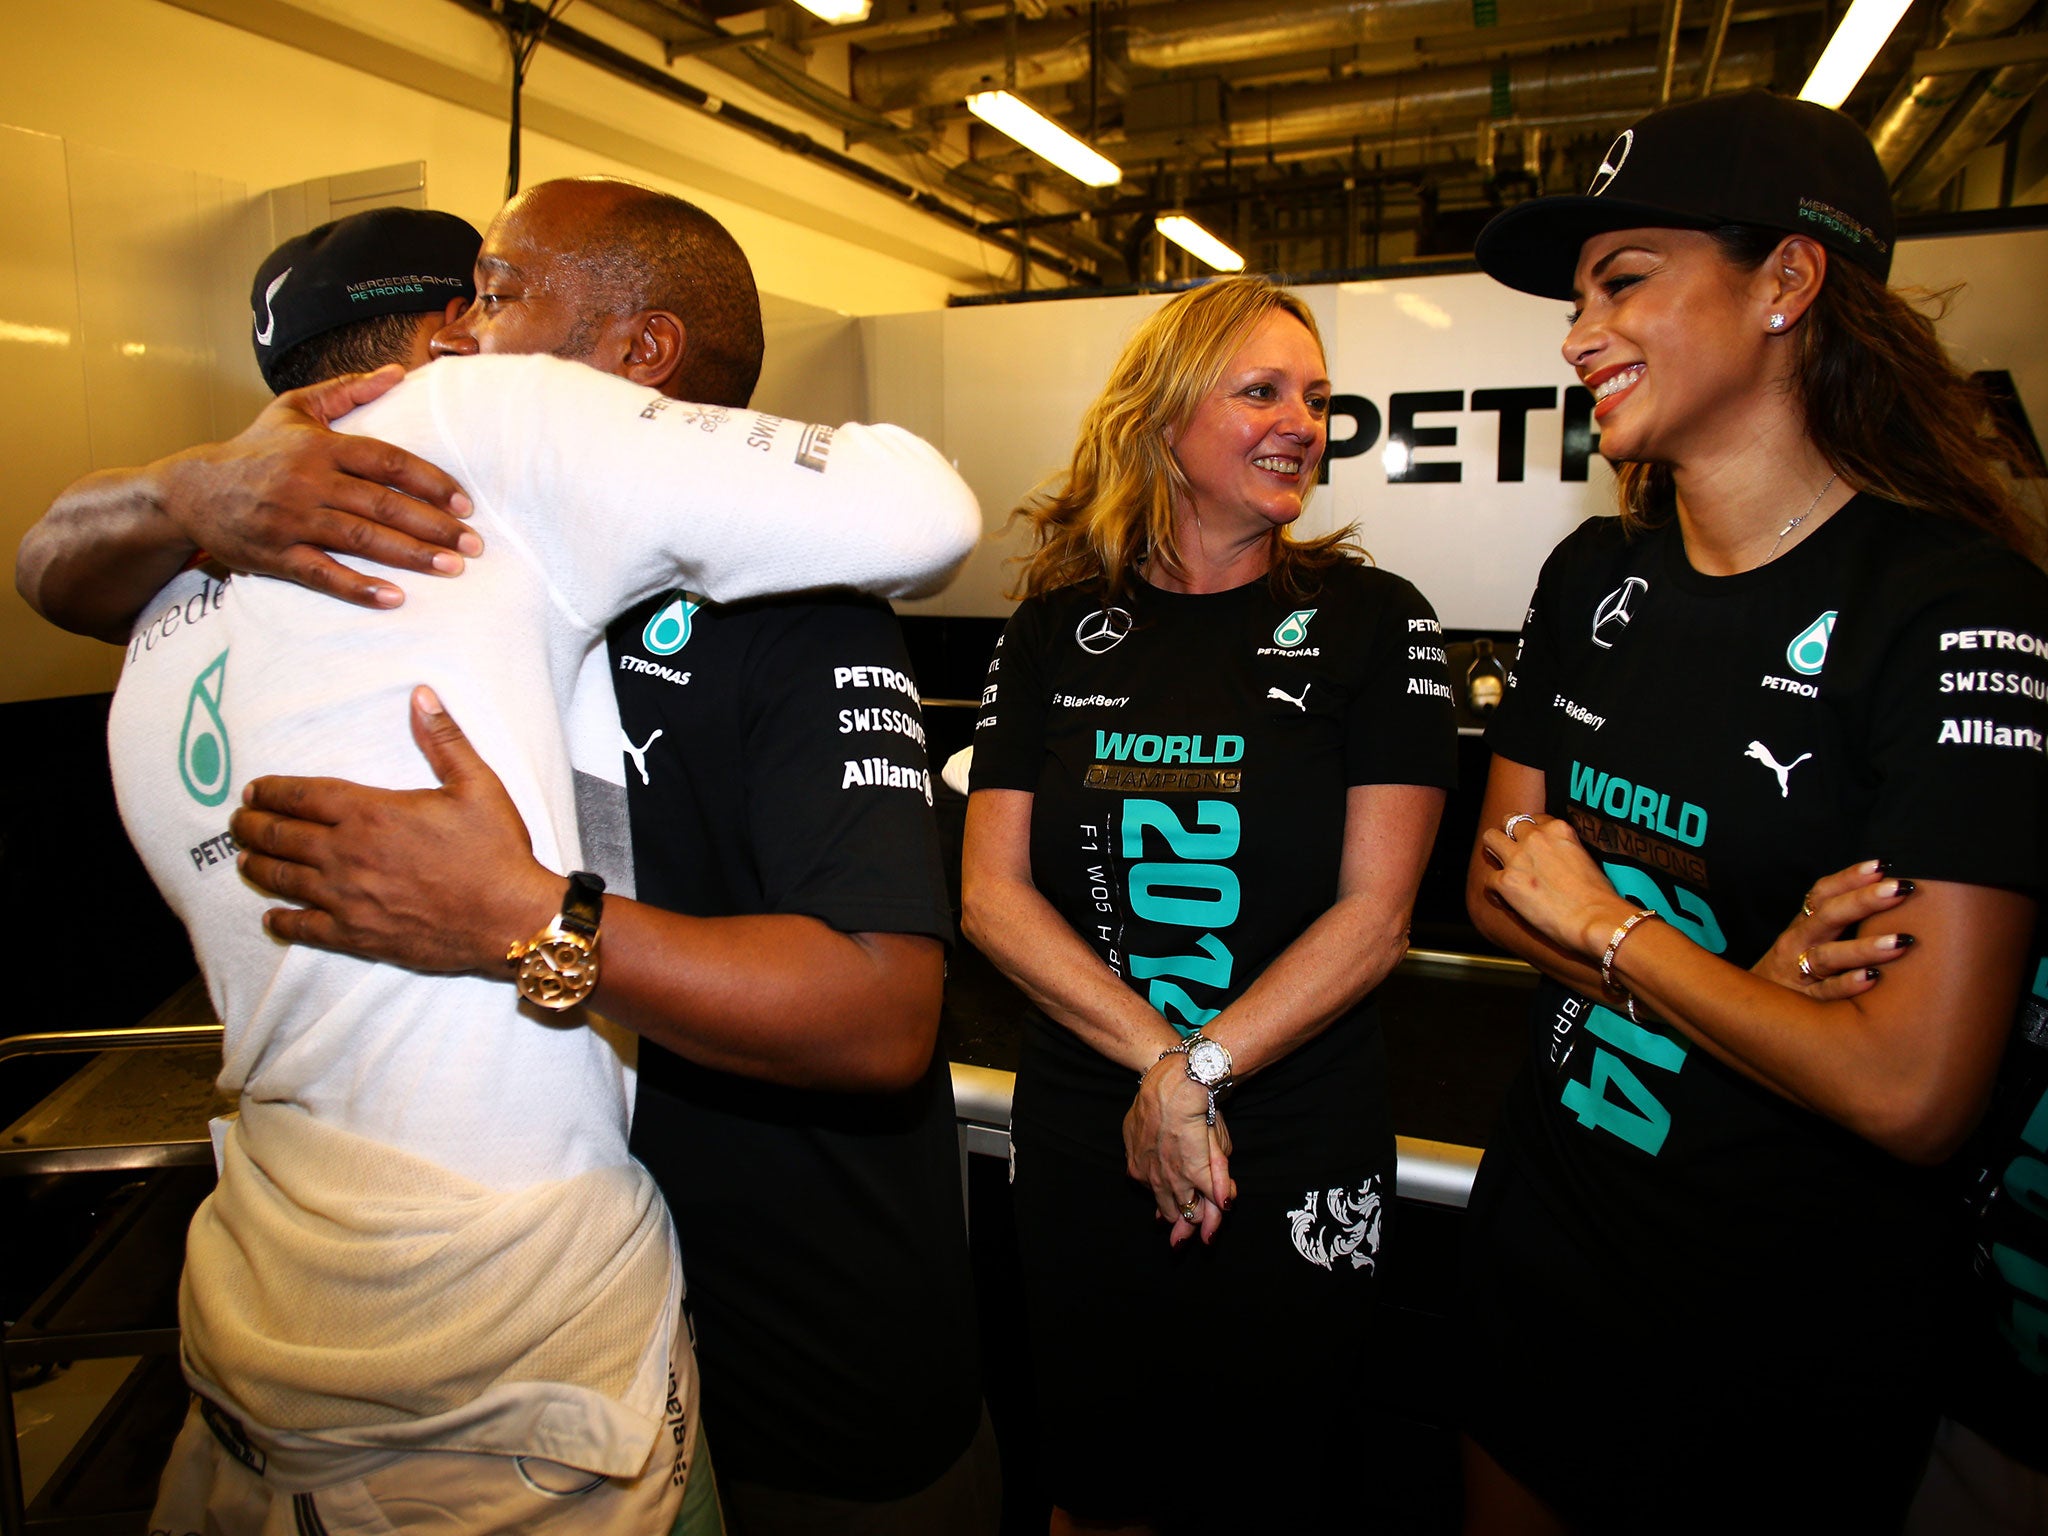 Lewis Hamilton wins 2014 F1 championship: Hamilton family fly in at the 11th hour to spur Mercedes driver on to title glory | The Independent | The Independent